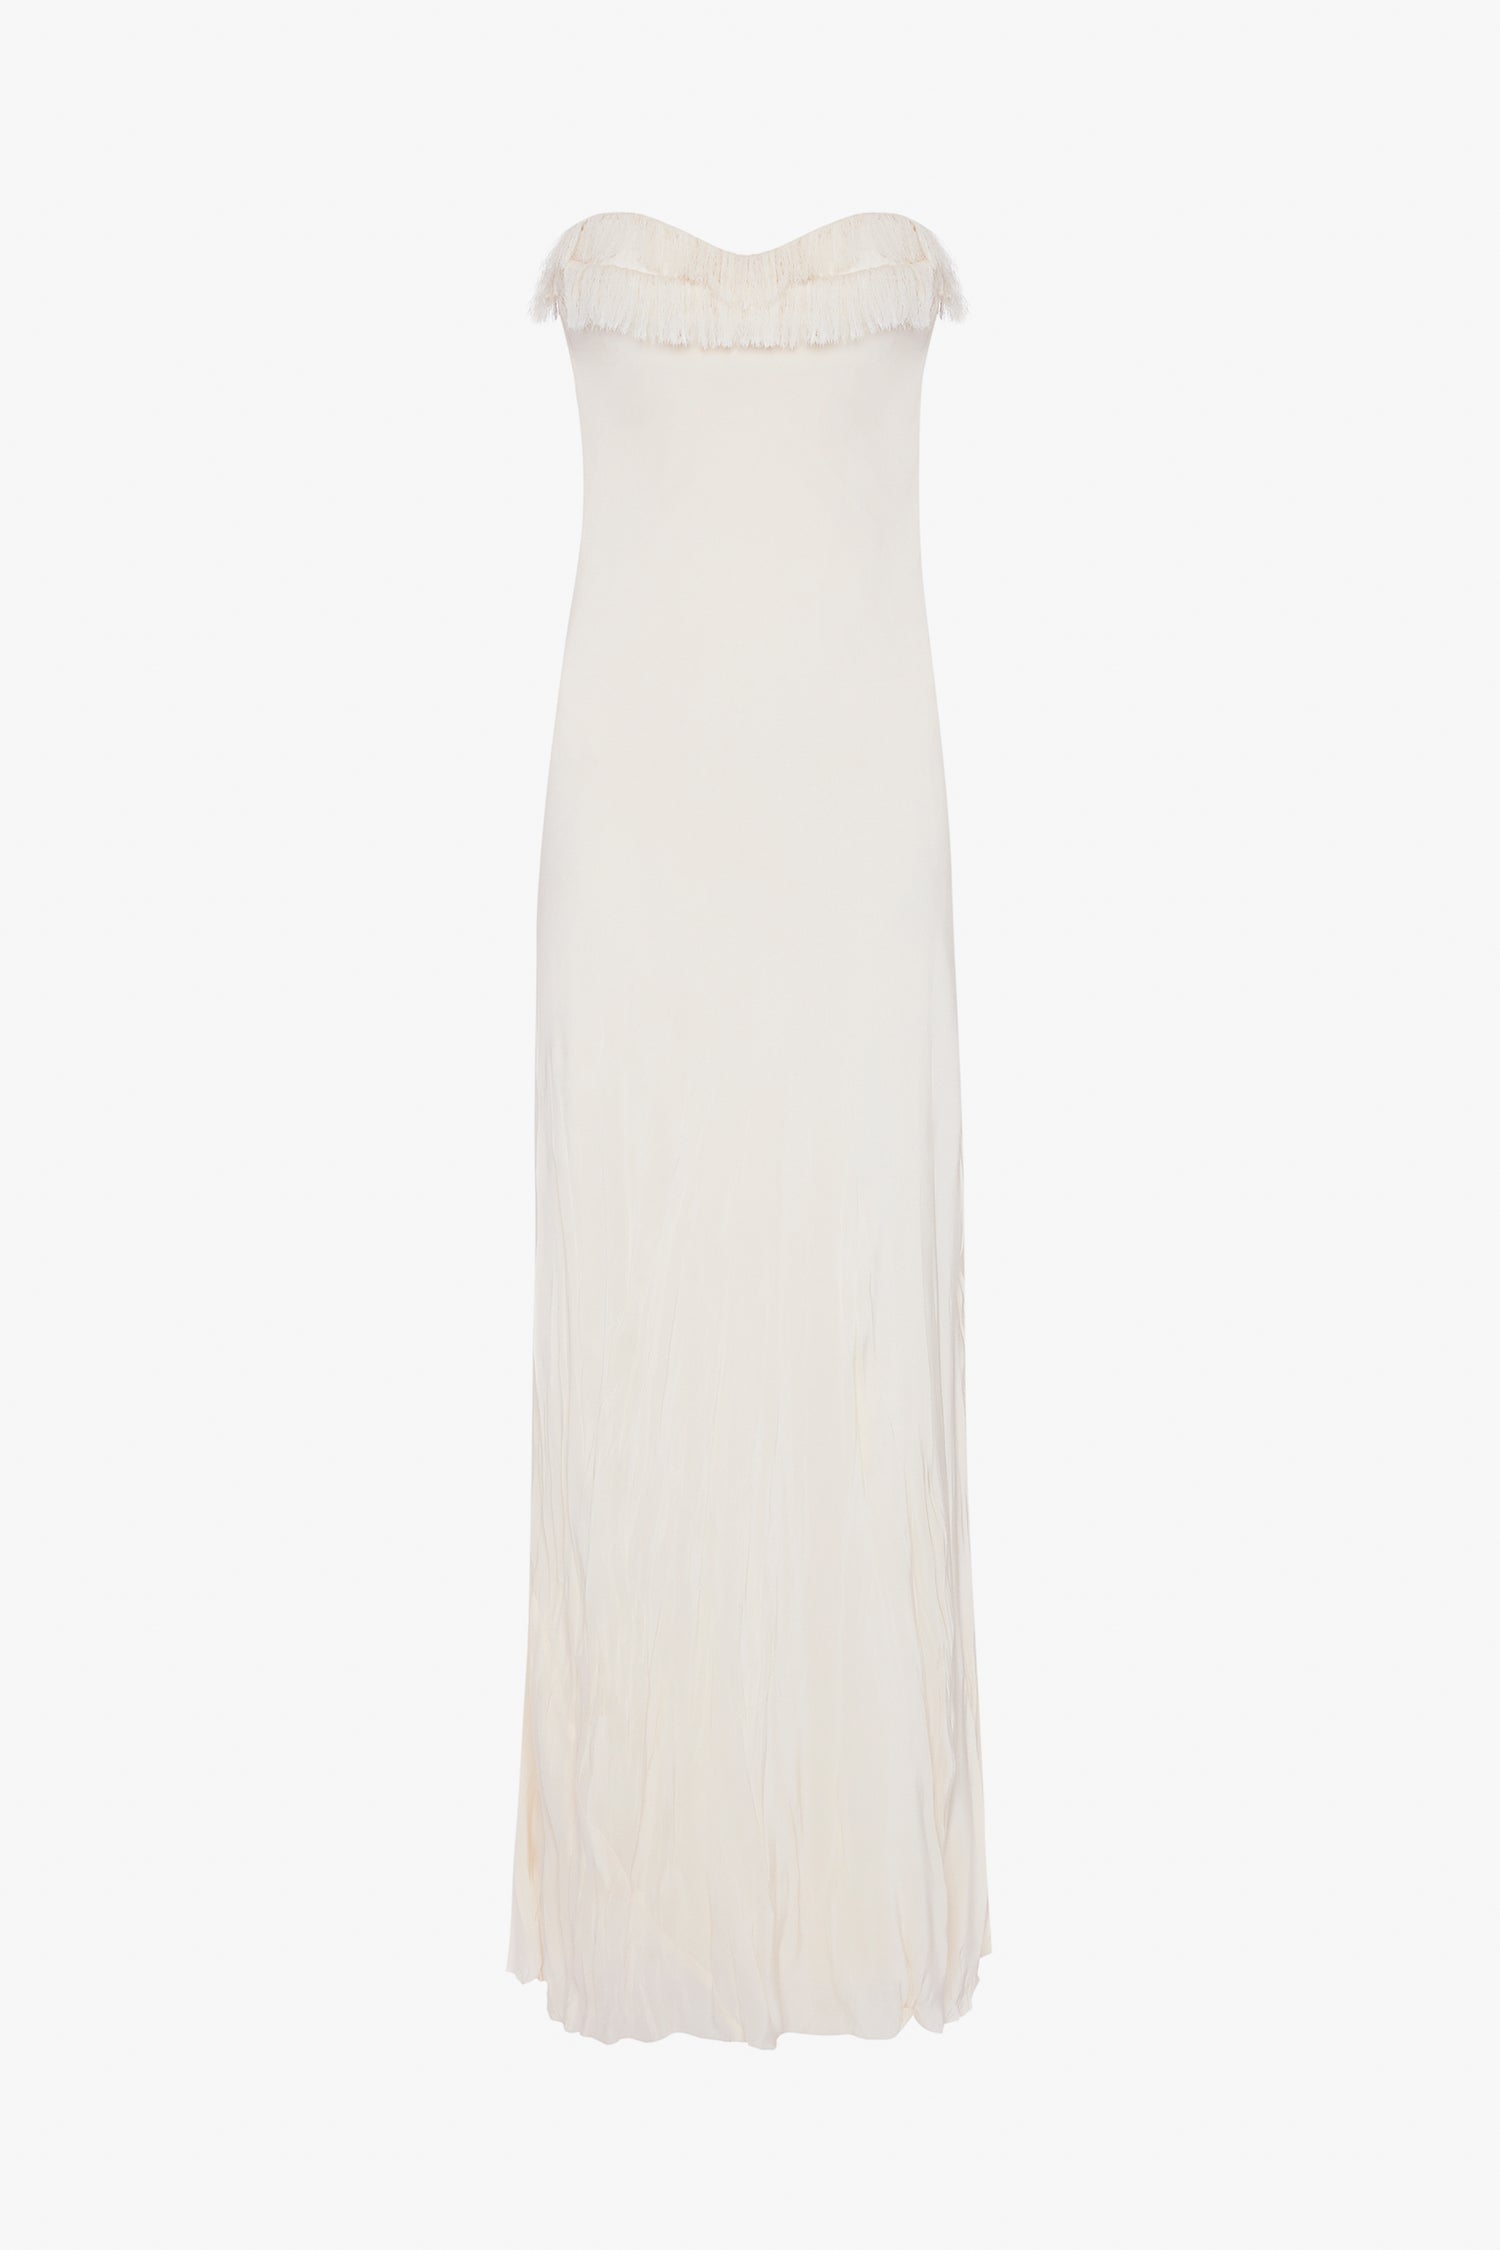 A plain white Exclusive Floor-Length Corset Detail Gown In Ivory with a crease-effect skirt, displayed against a white background by Victoria Beckham.